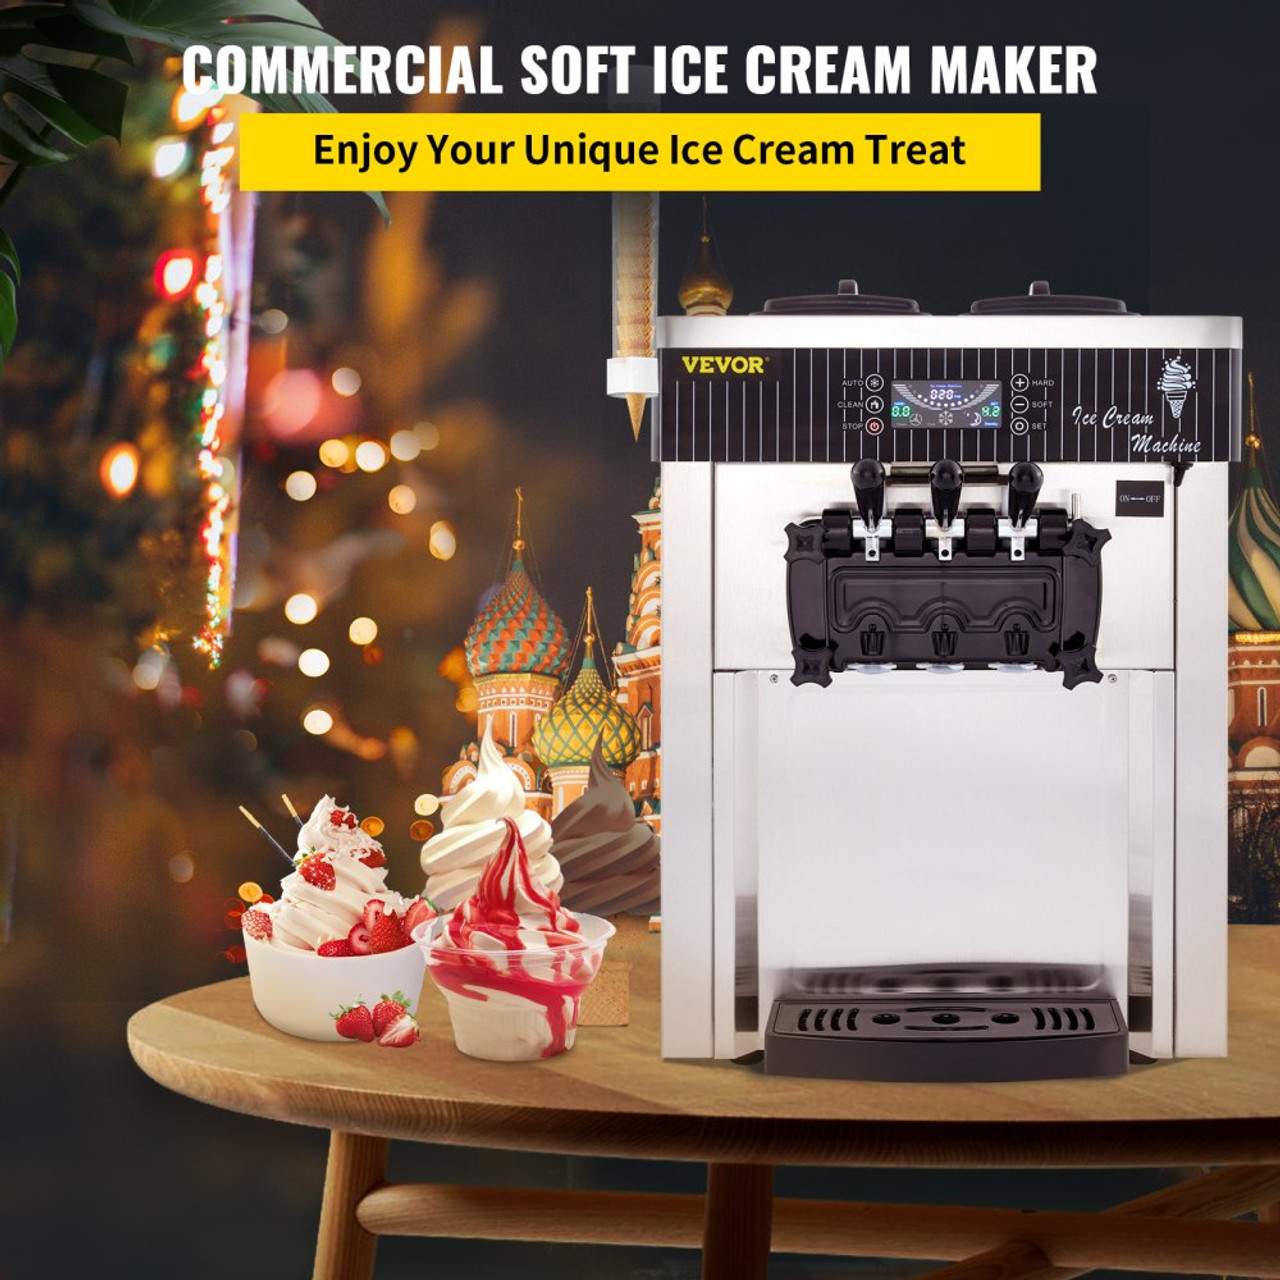 Commercial Ice Cream Machine 5.3 to 7.4Gal per Hour Soft Serve with LED Display Auto Clean 3 Flavors Perfect for Restaurants Snack Bar, 2200W, Sliver